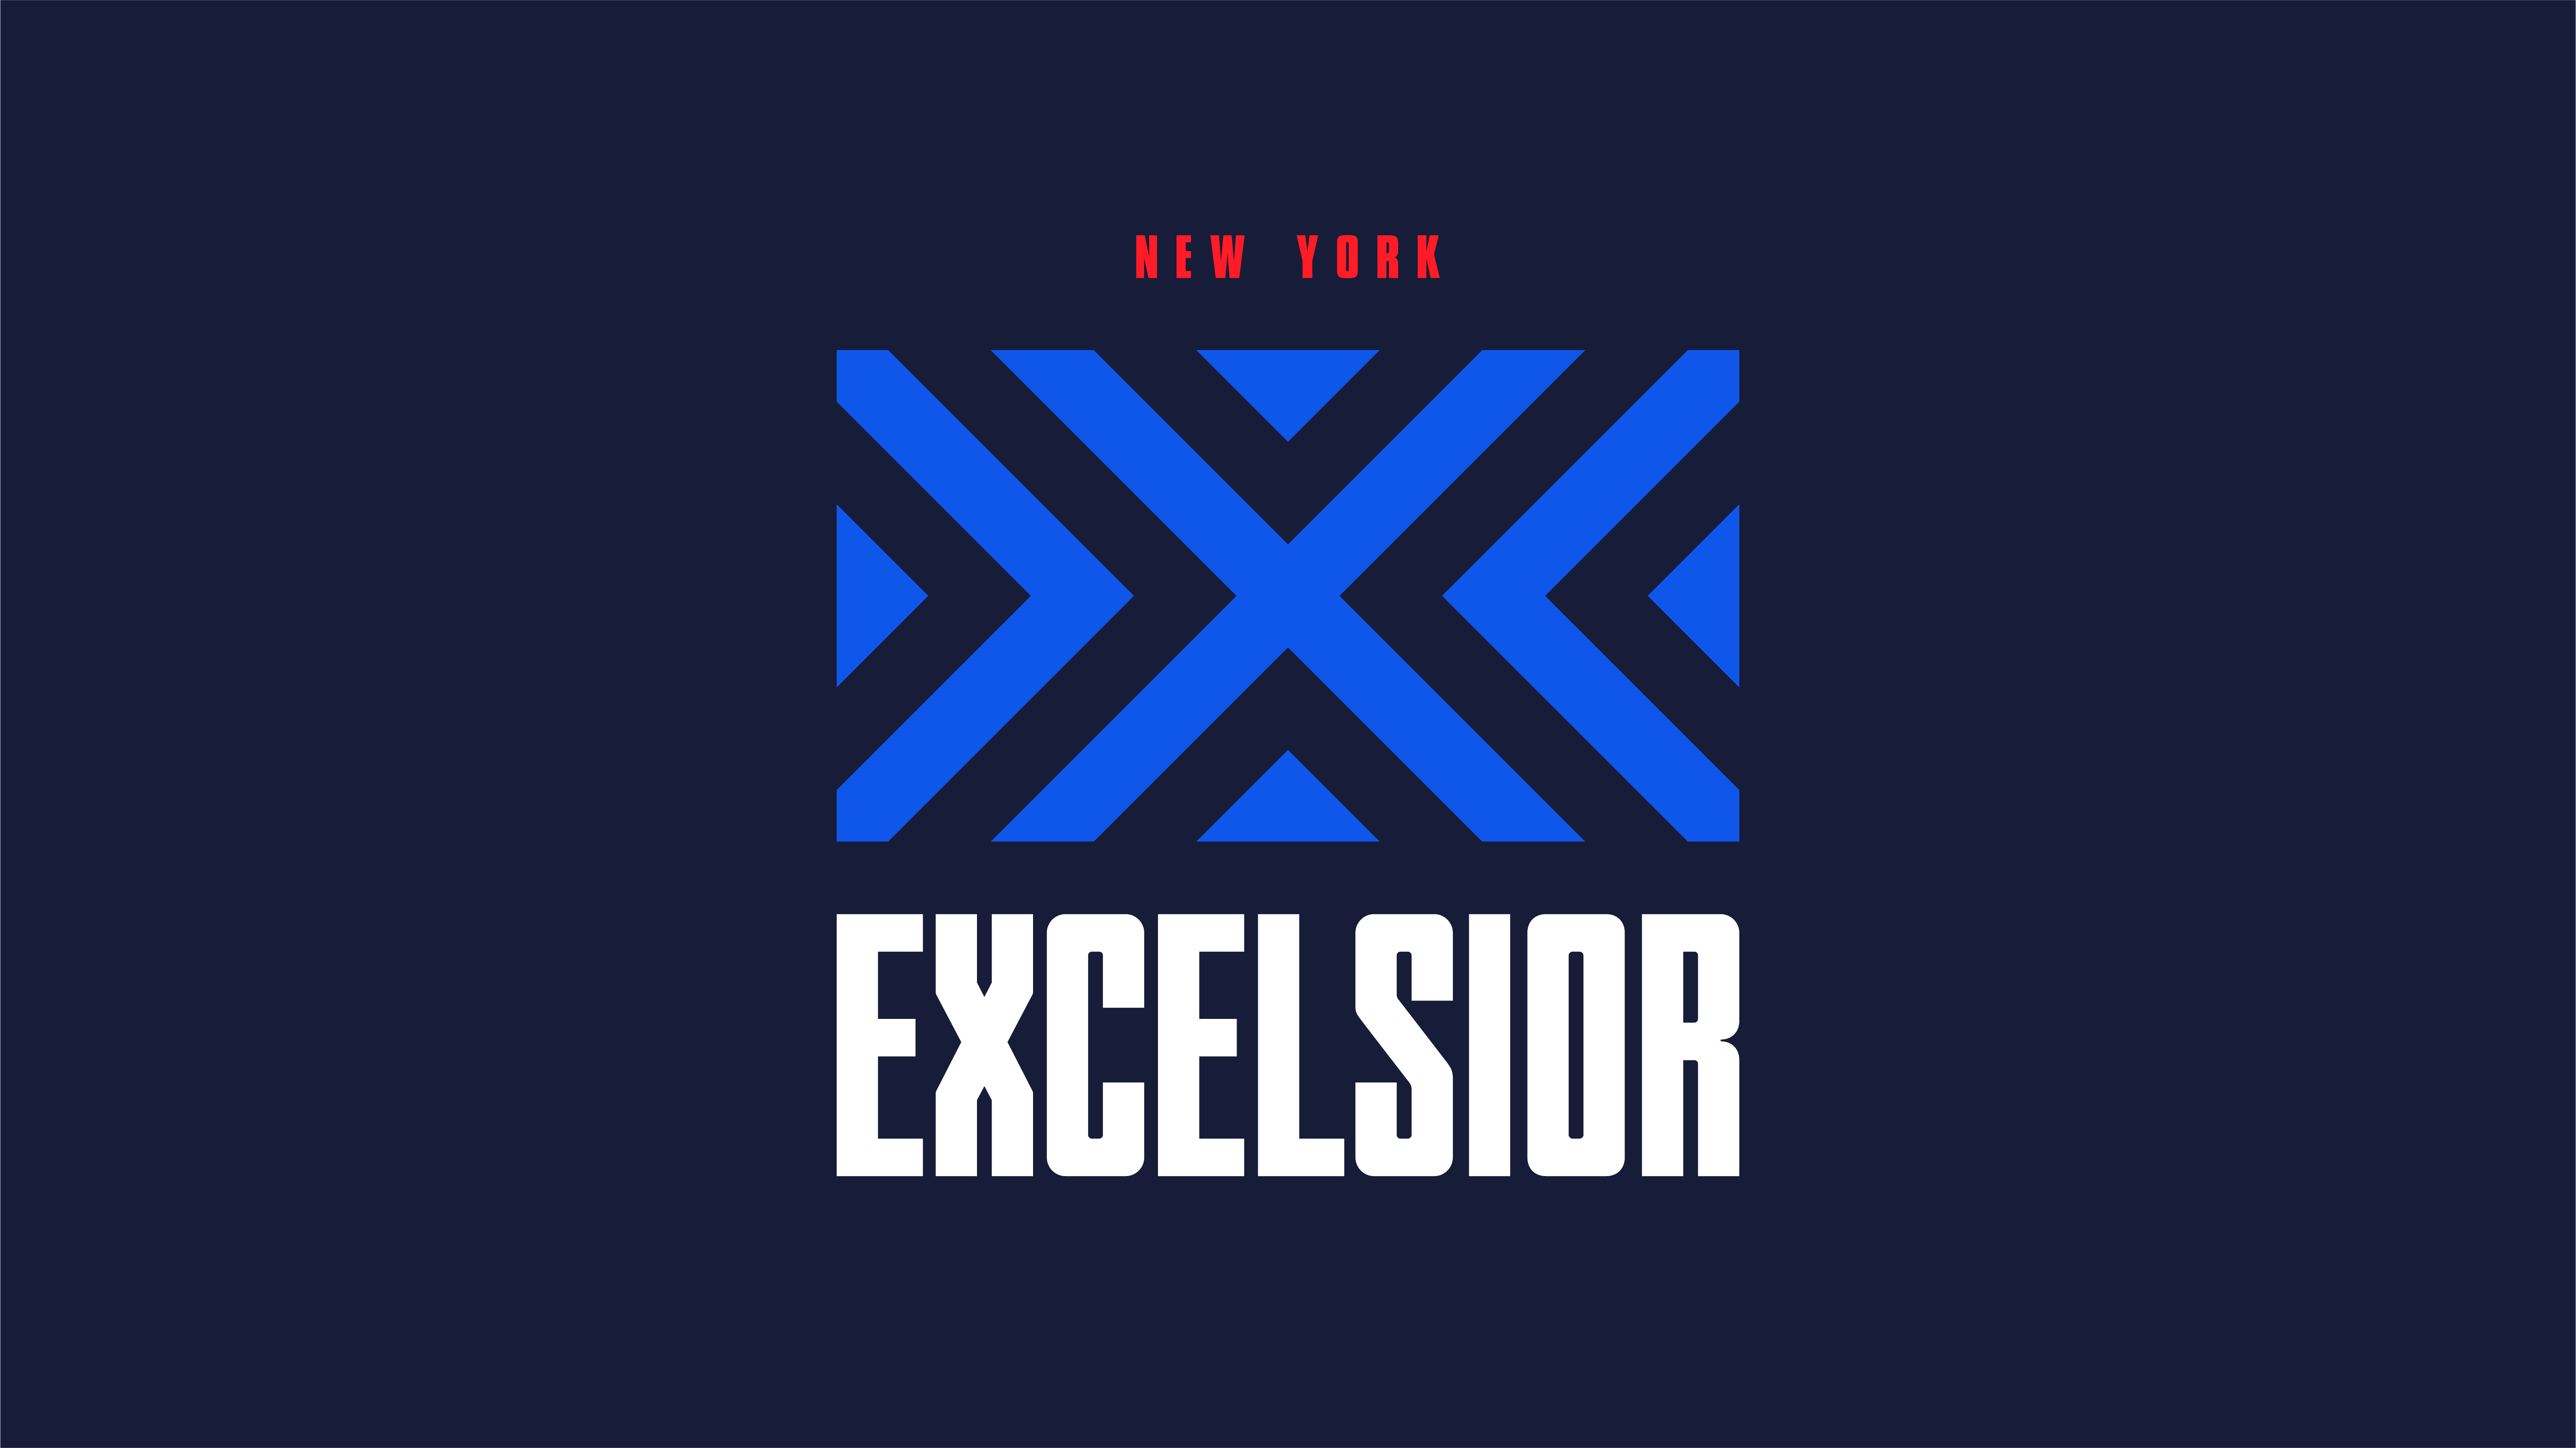 New York Excelsior Wallpapers Wallpaper Cave